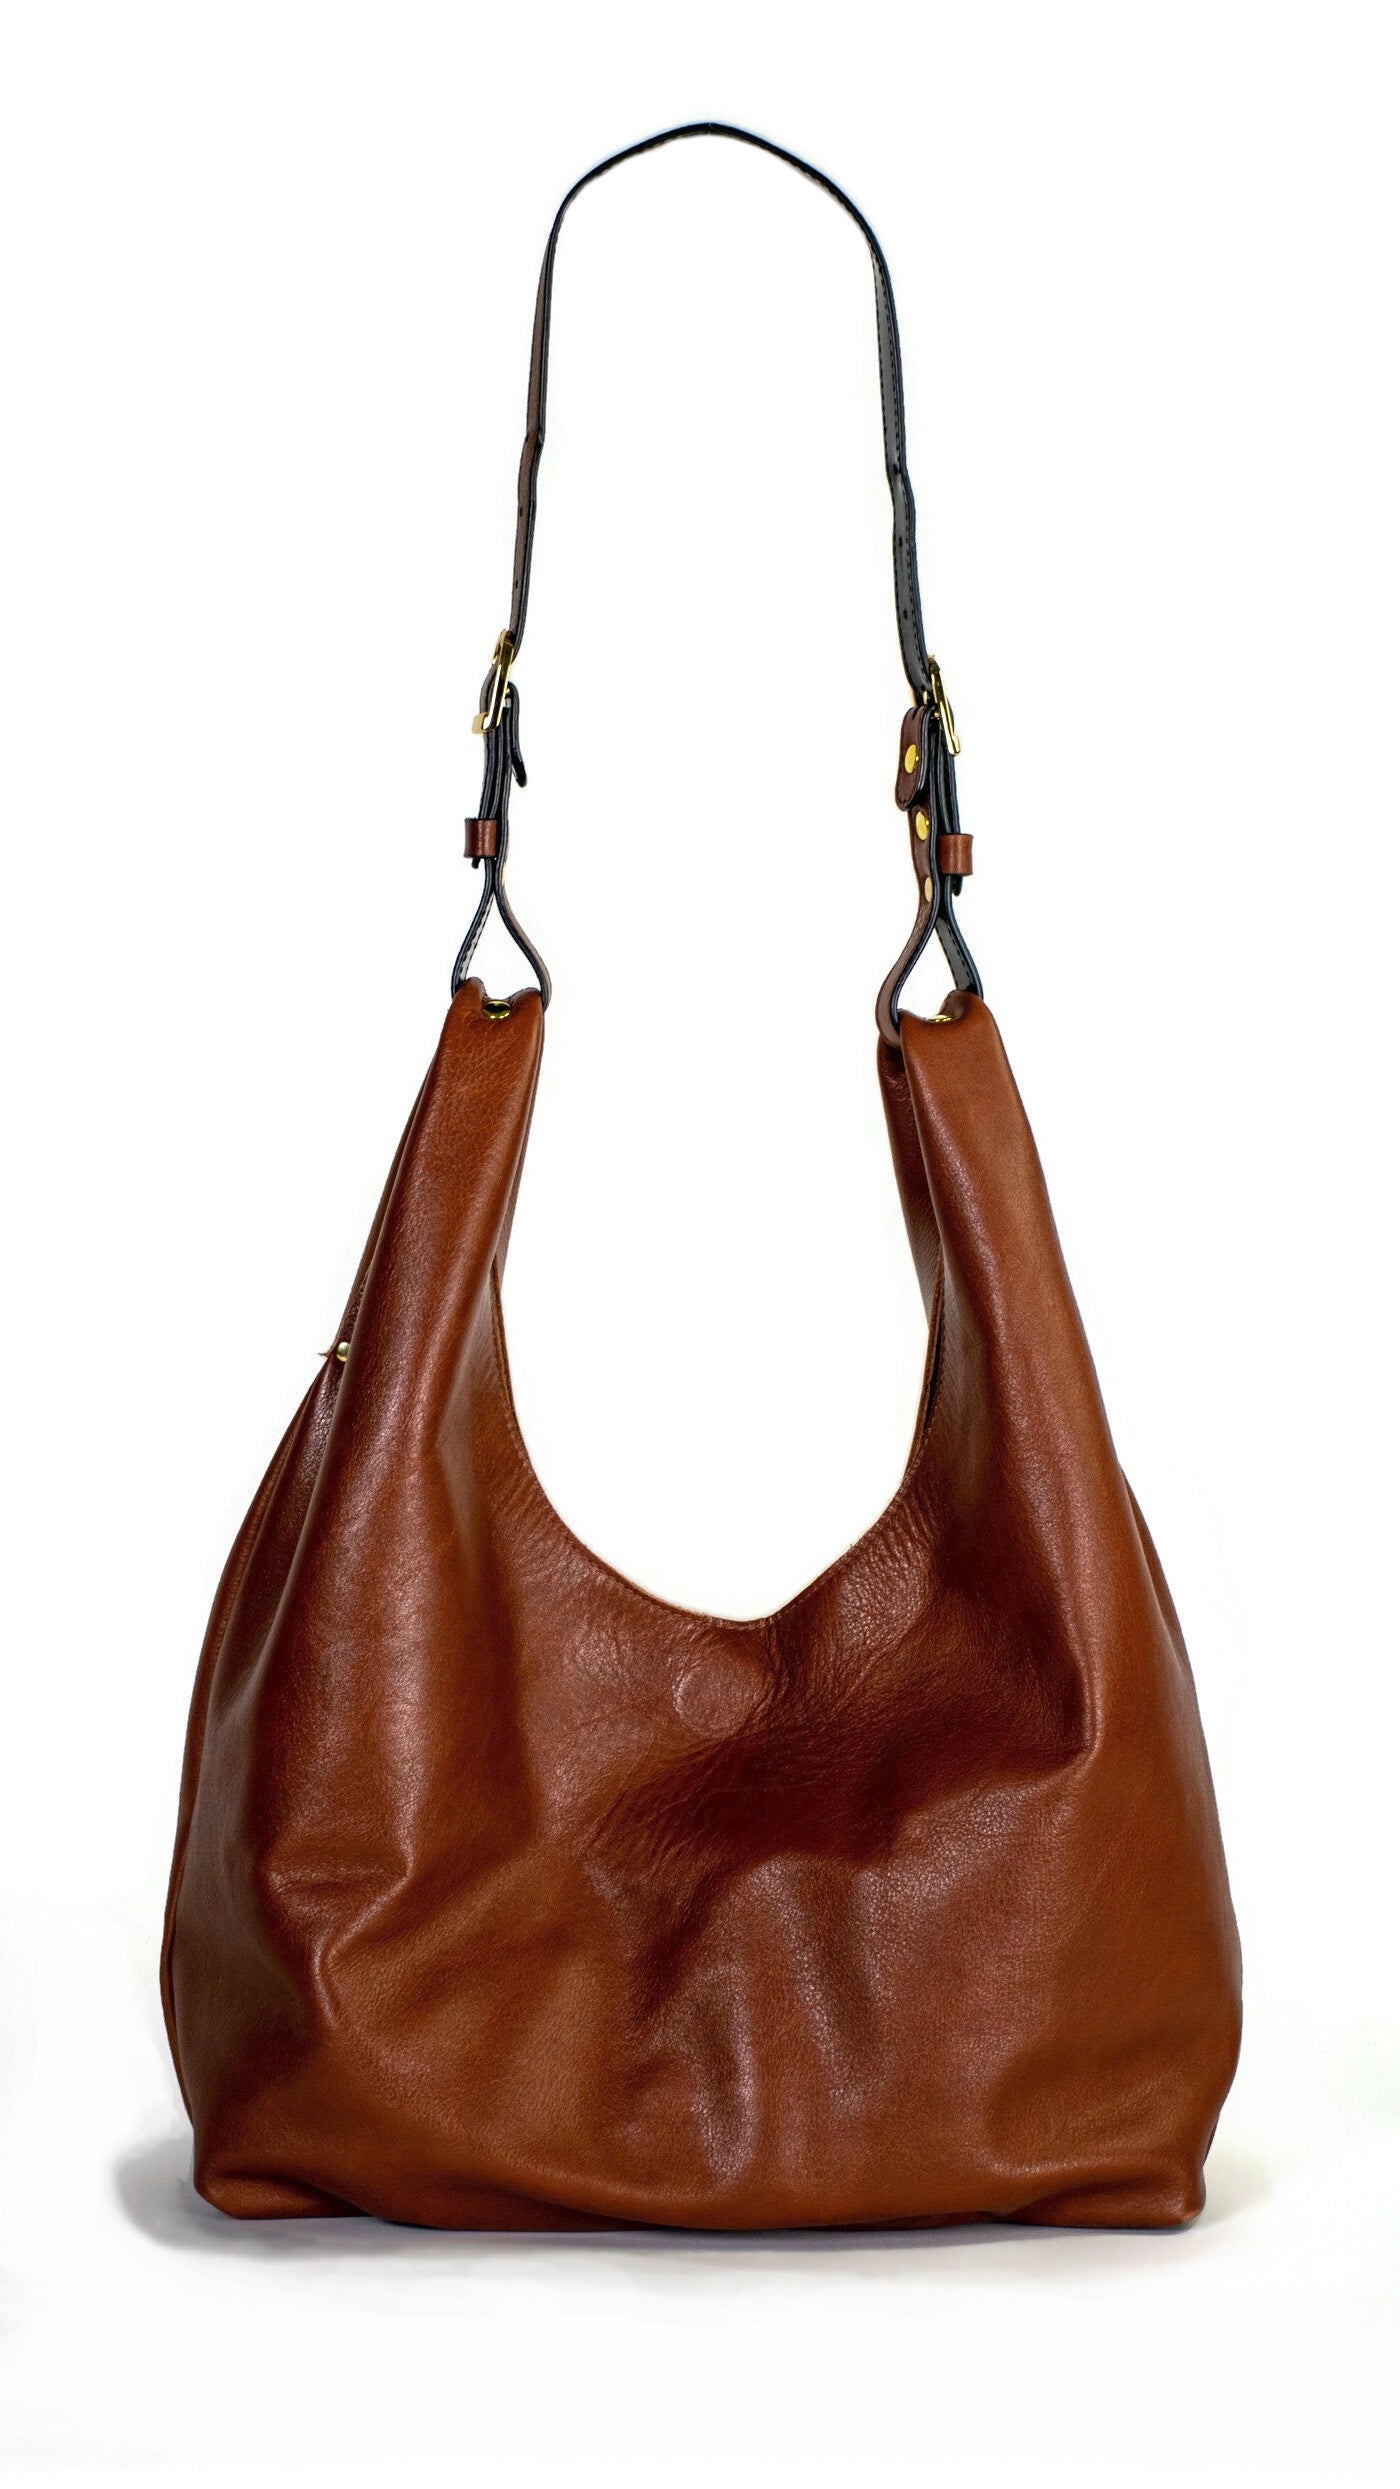 Back of Cognac brown leather hobo shoulder bag handcrafted in Italian calfskin by slow fashion indie designer Liv McClintock. Feature croc-embossed leather inlay. Made in Wilmington Delaware USA.